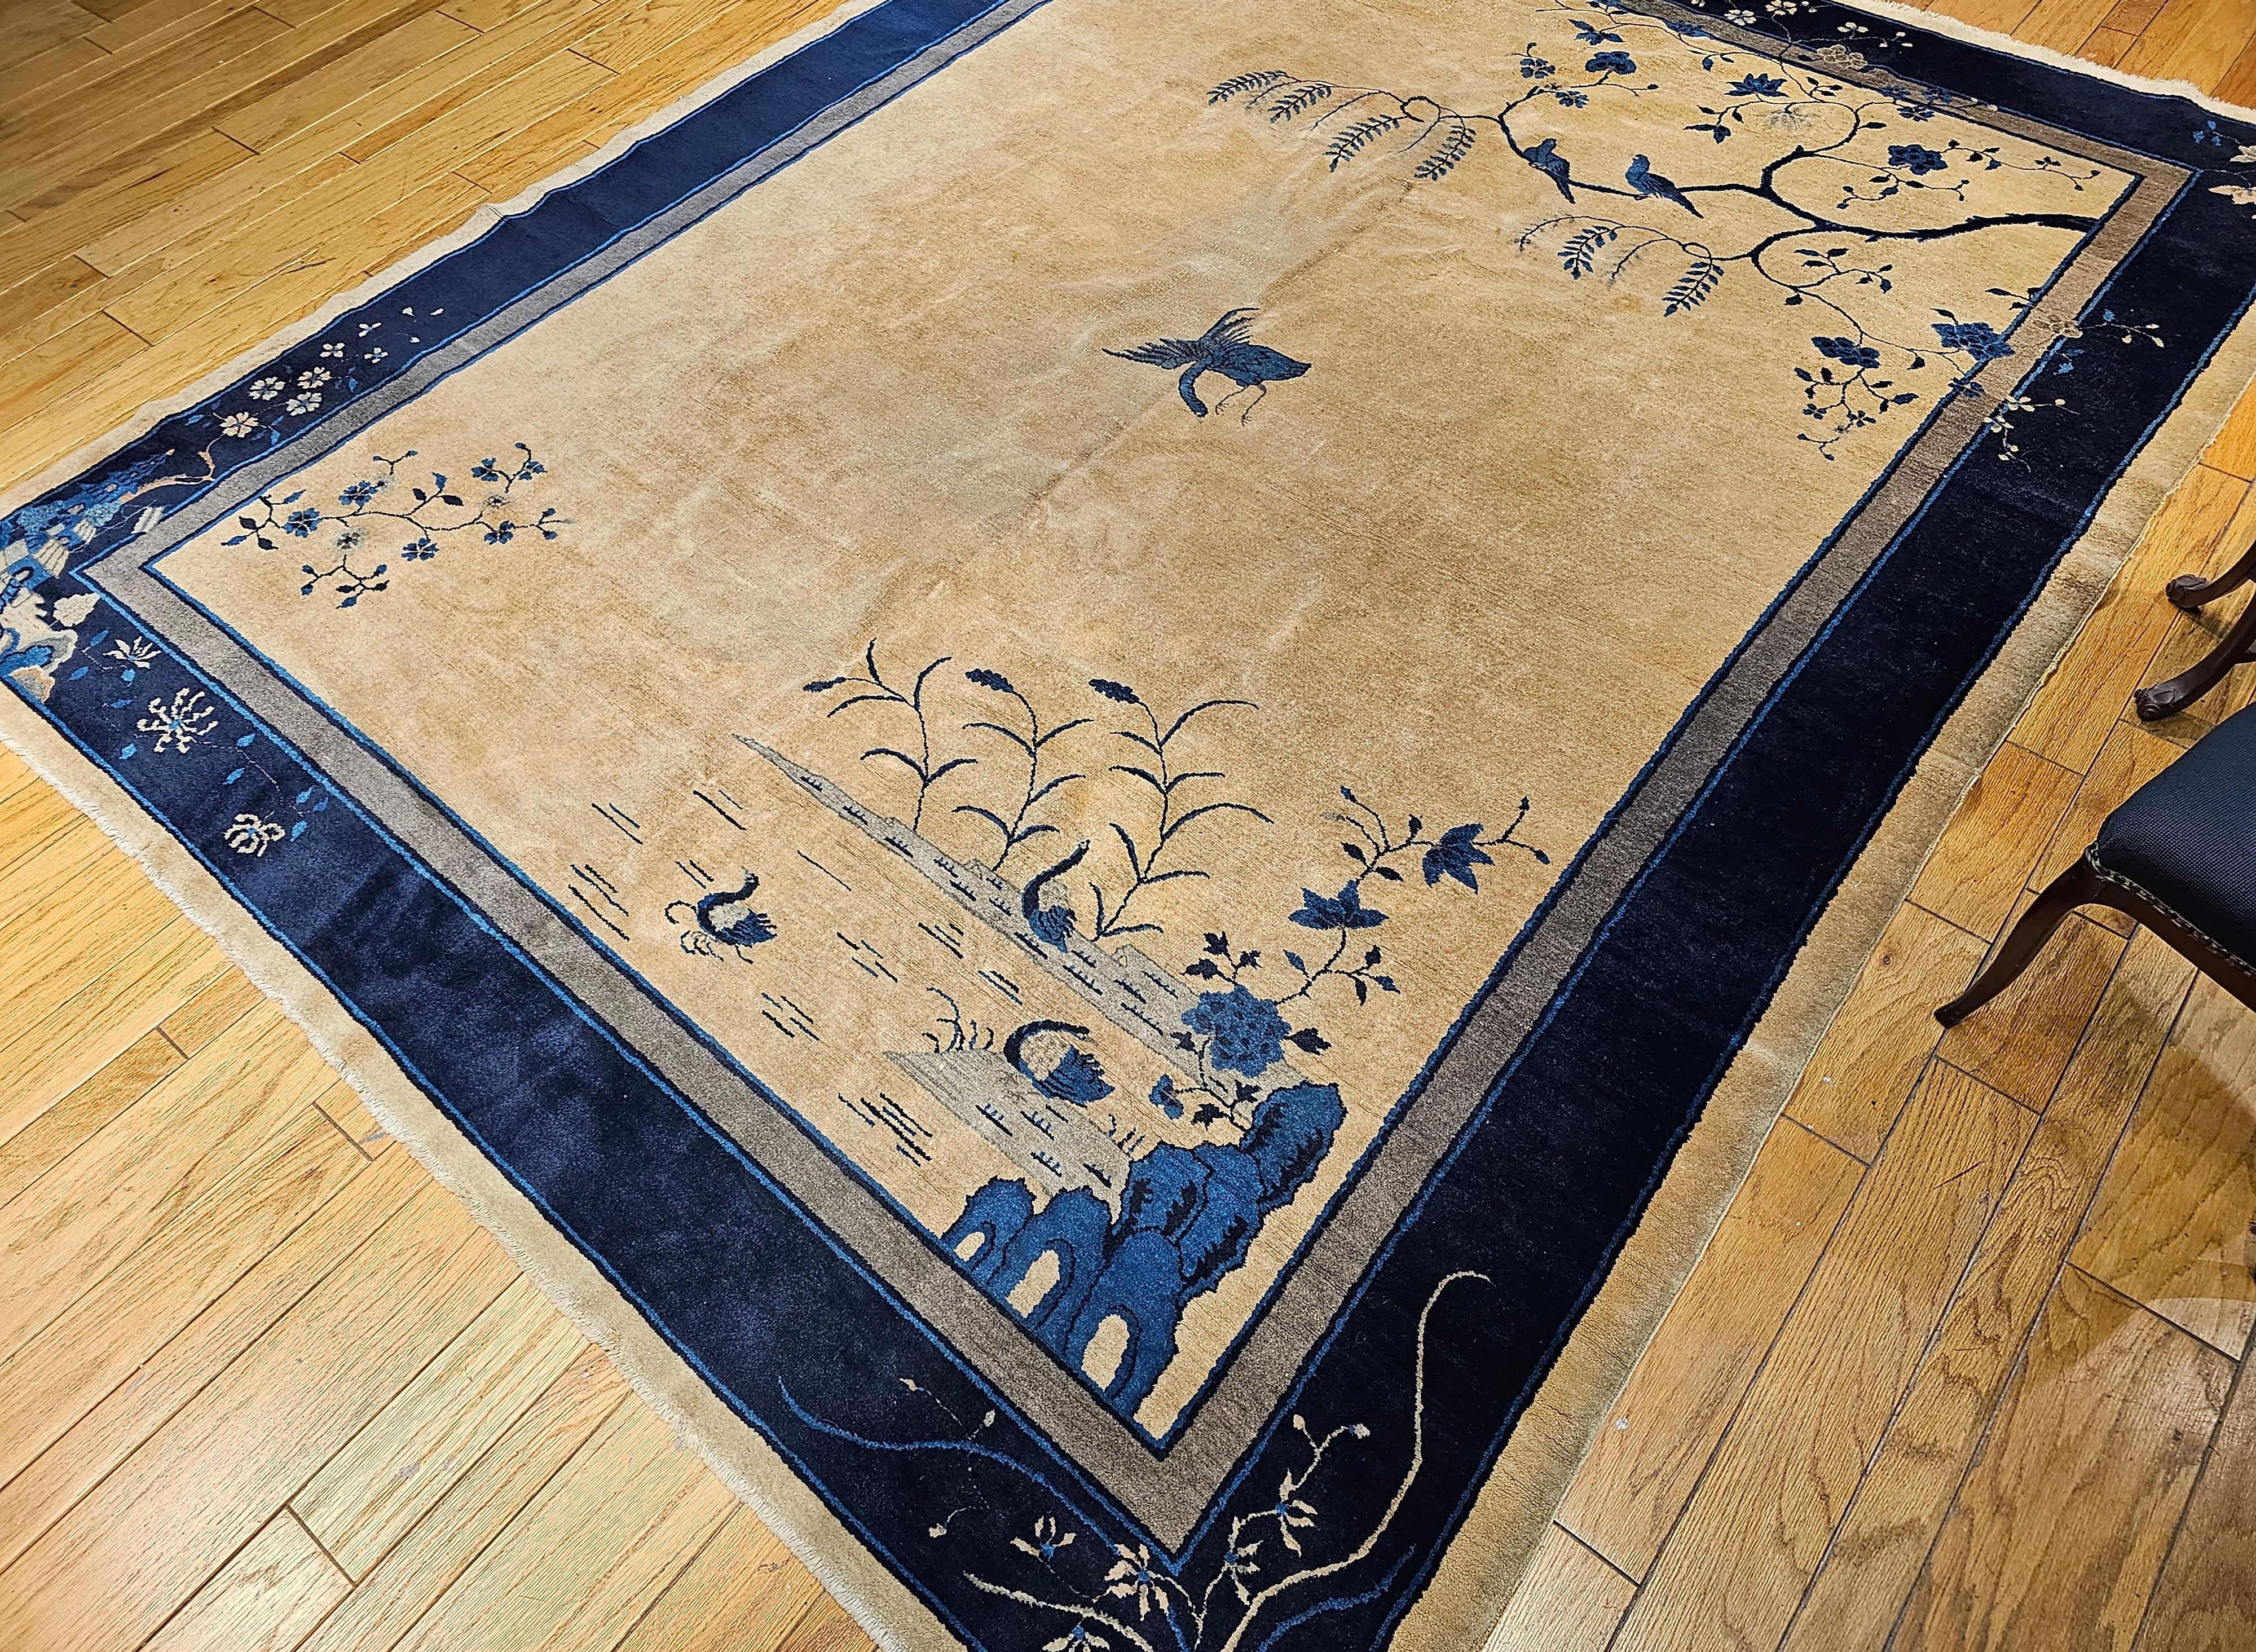 Vintage Art Deco Chinese Rug with Cranes, Pagoda, Mountains in Wheat, Blue, Navy For Sale 8